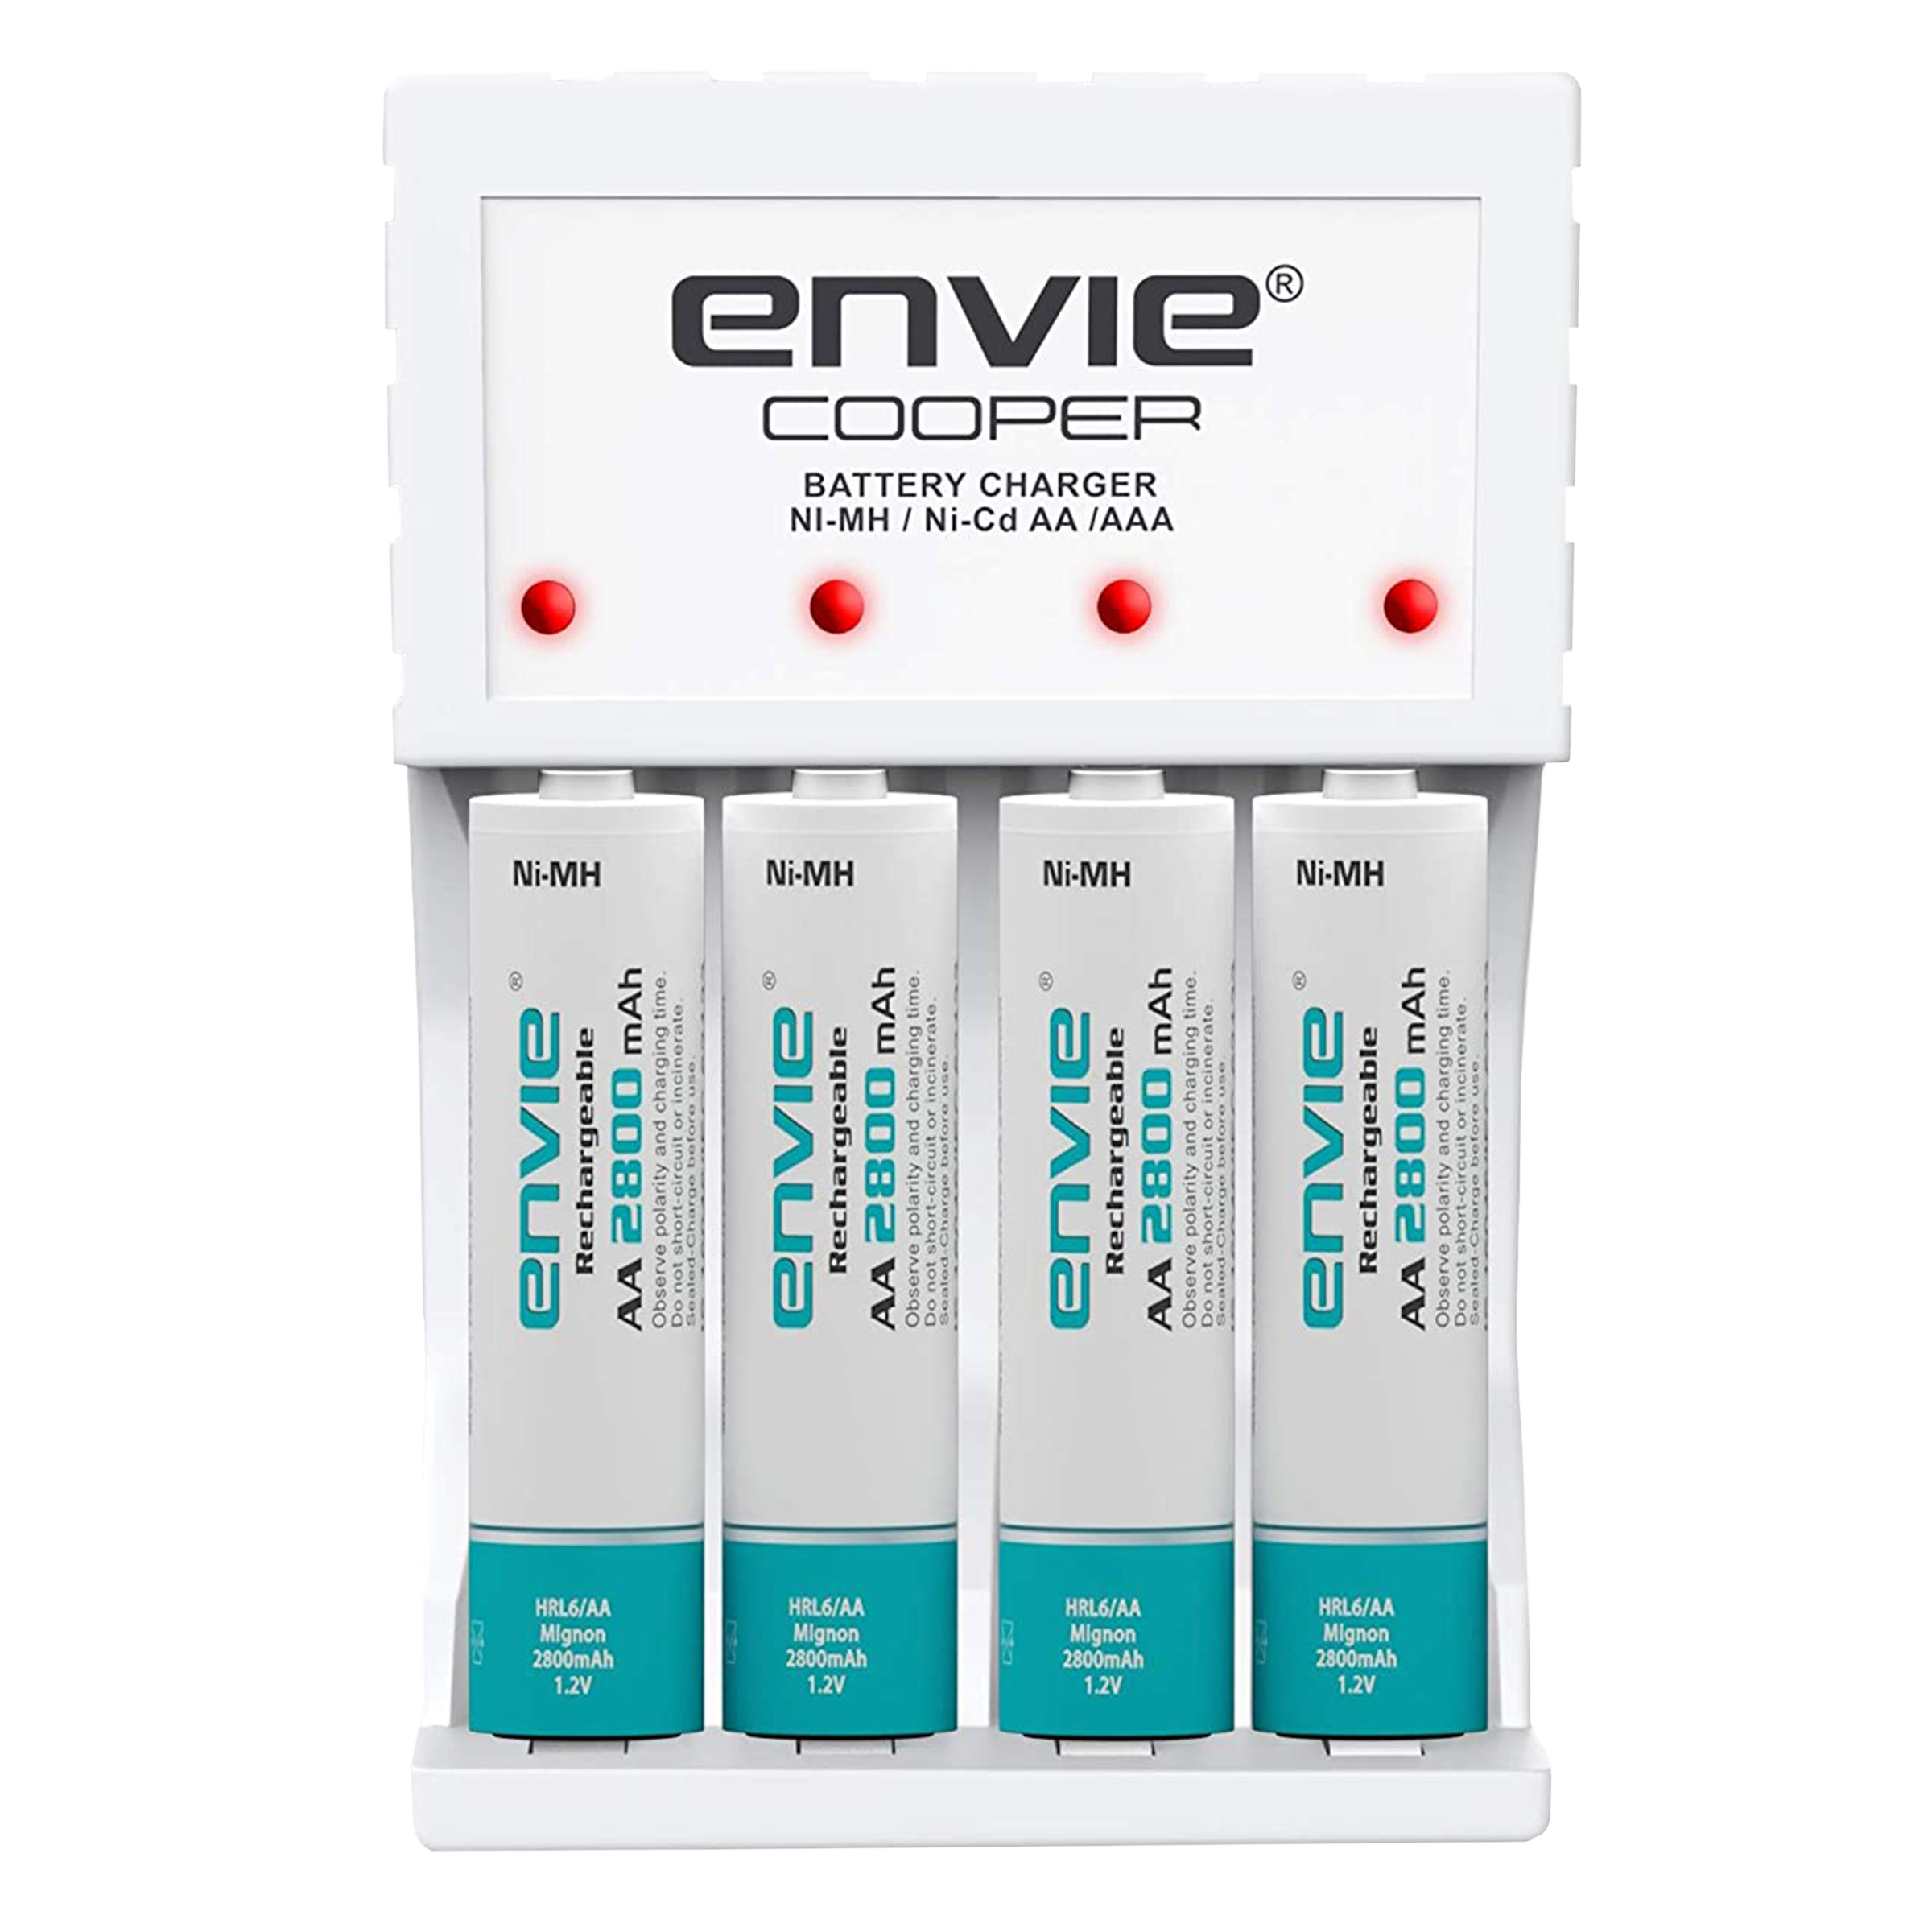 envie Cooper ECR-20 MC Camera Battery Charger Combo for AA2100 (4-Ports, Short Circuit Protection)